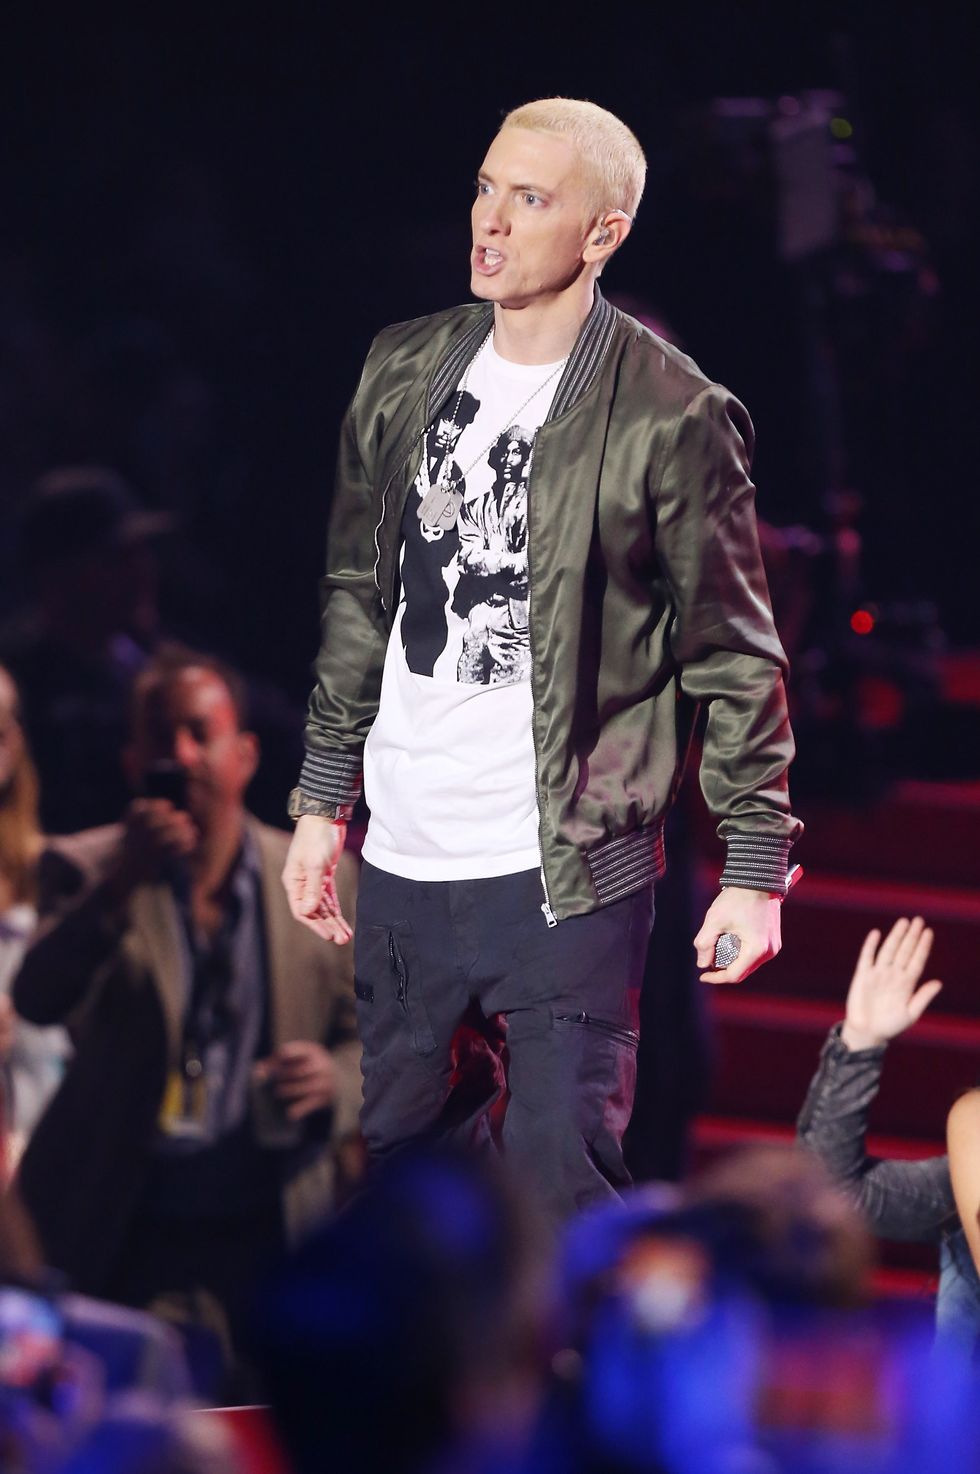 LOS ANGELES, CA - APRIL 13:  Eminem performs onstage during the 2014 MTV Movie Awards held at Nokia Theatre L.A. Live on April 13, 2014 in Los Angeles, California.  (Photo by Michael Tran/FilmMagic)